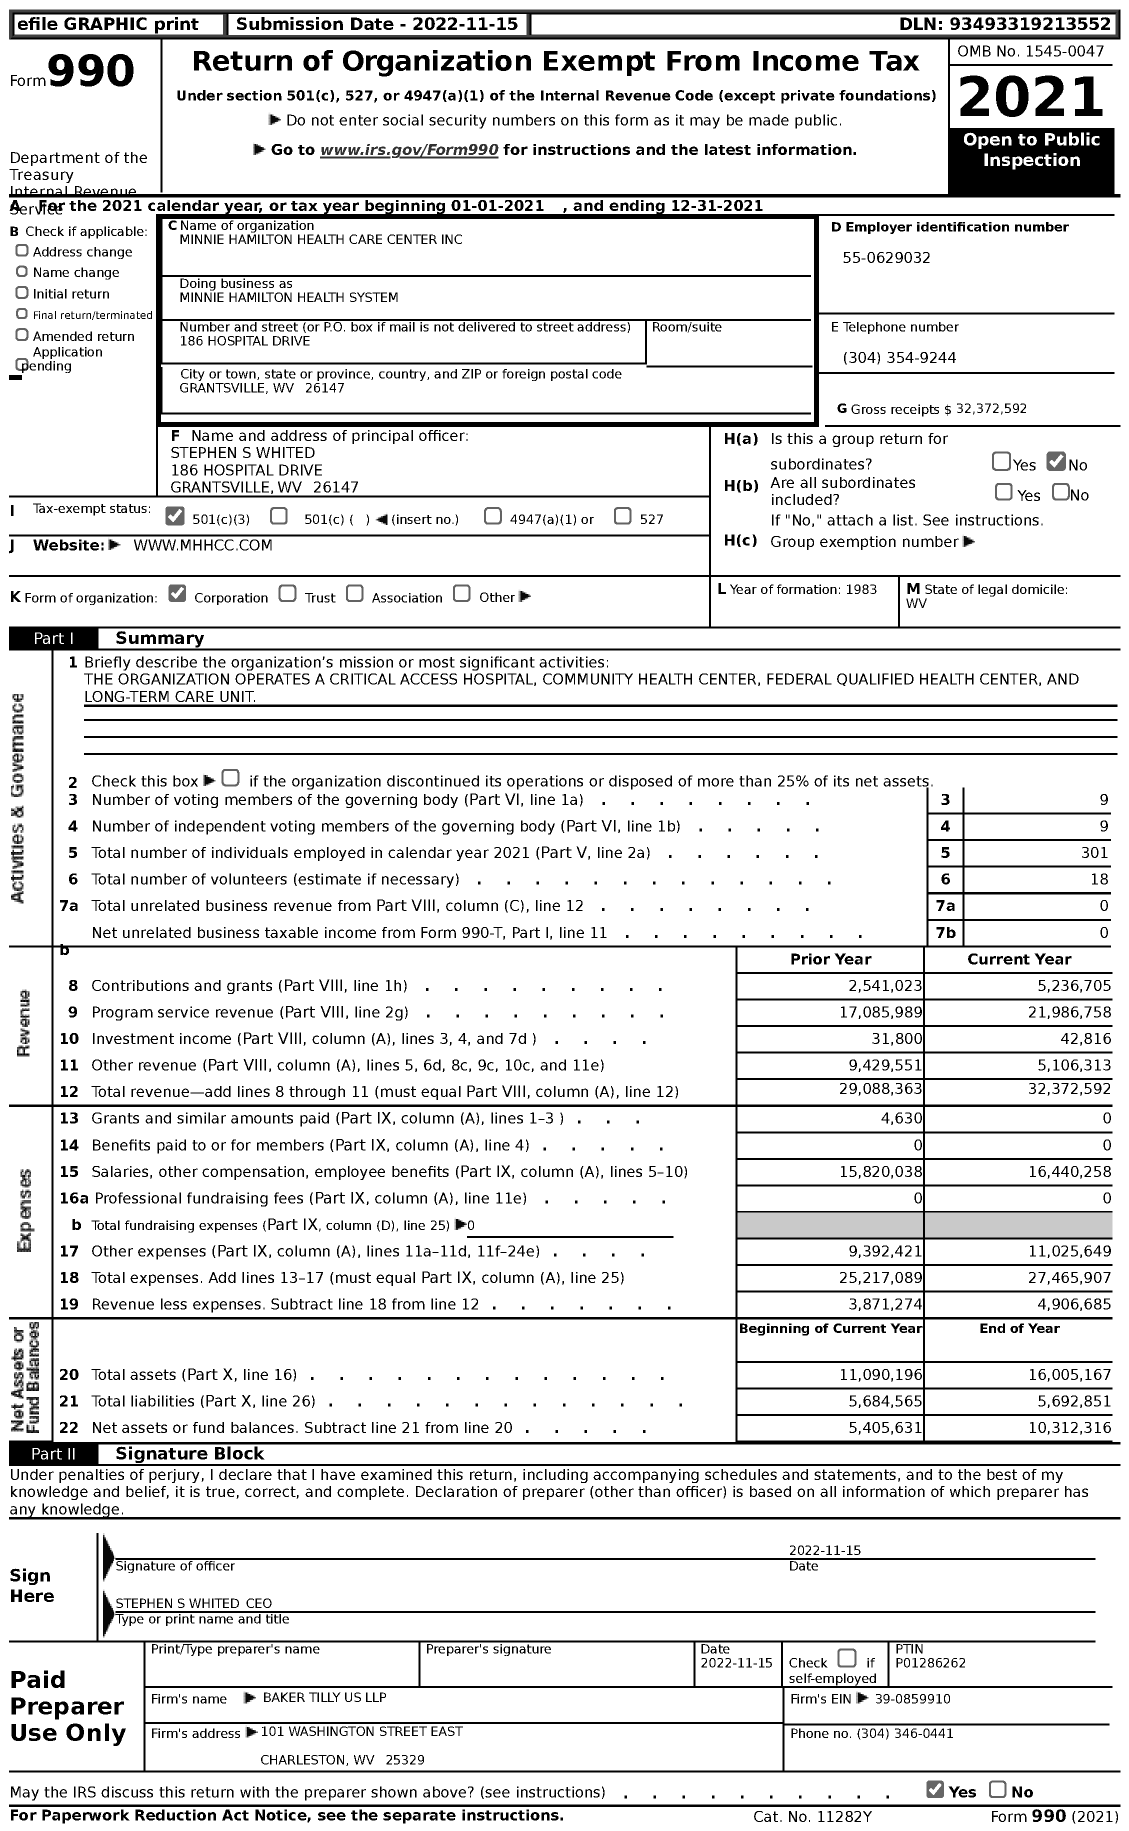 Image of first page of 2021 Form 990 for Minnie Hamilton Health System (MHHS)